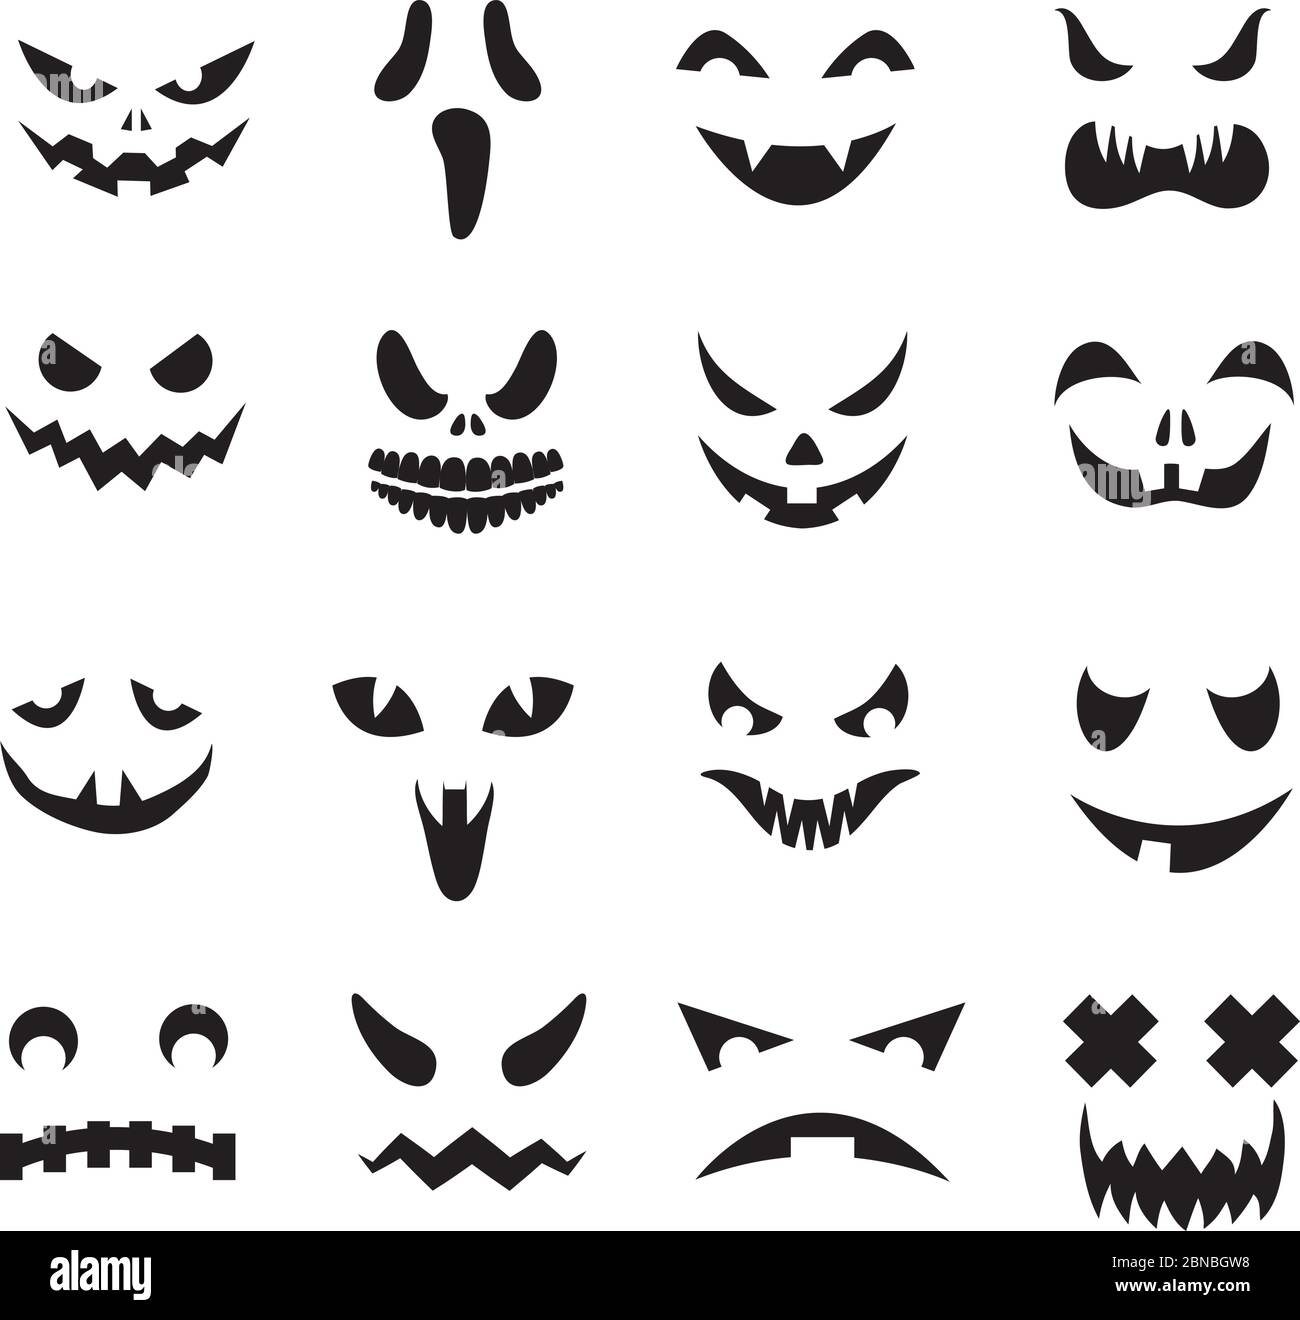 Pumpkin faces. Halloween jack o lantern face silhouettes. Monster ghost carving scary eyes and mouth vector icons set. Illustration of halloween face silhouette, scary monster pumpkin Stock Vector